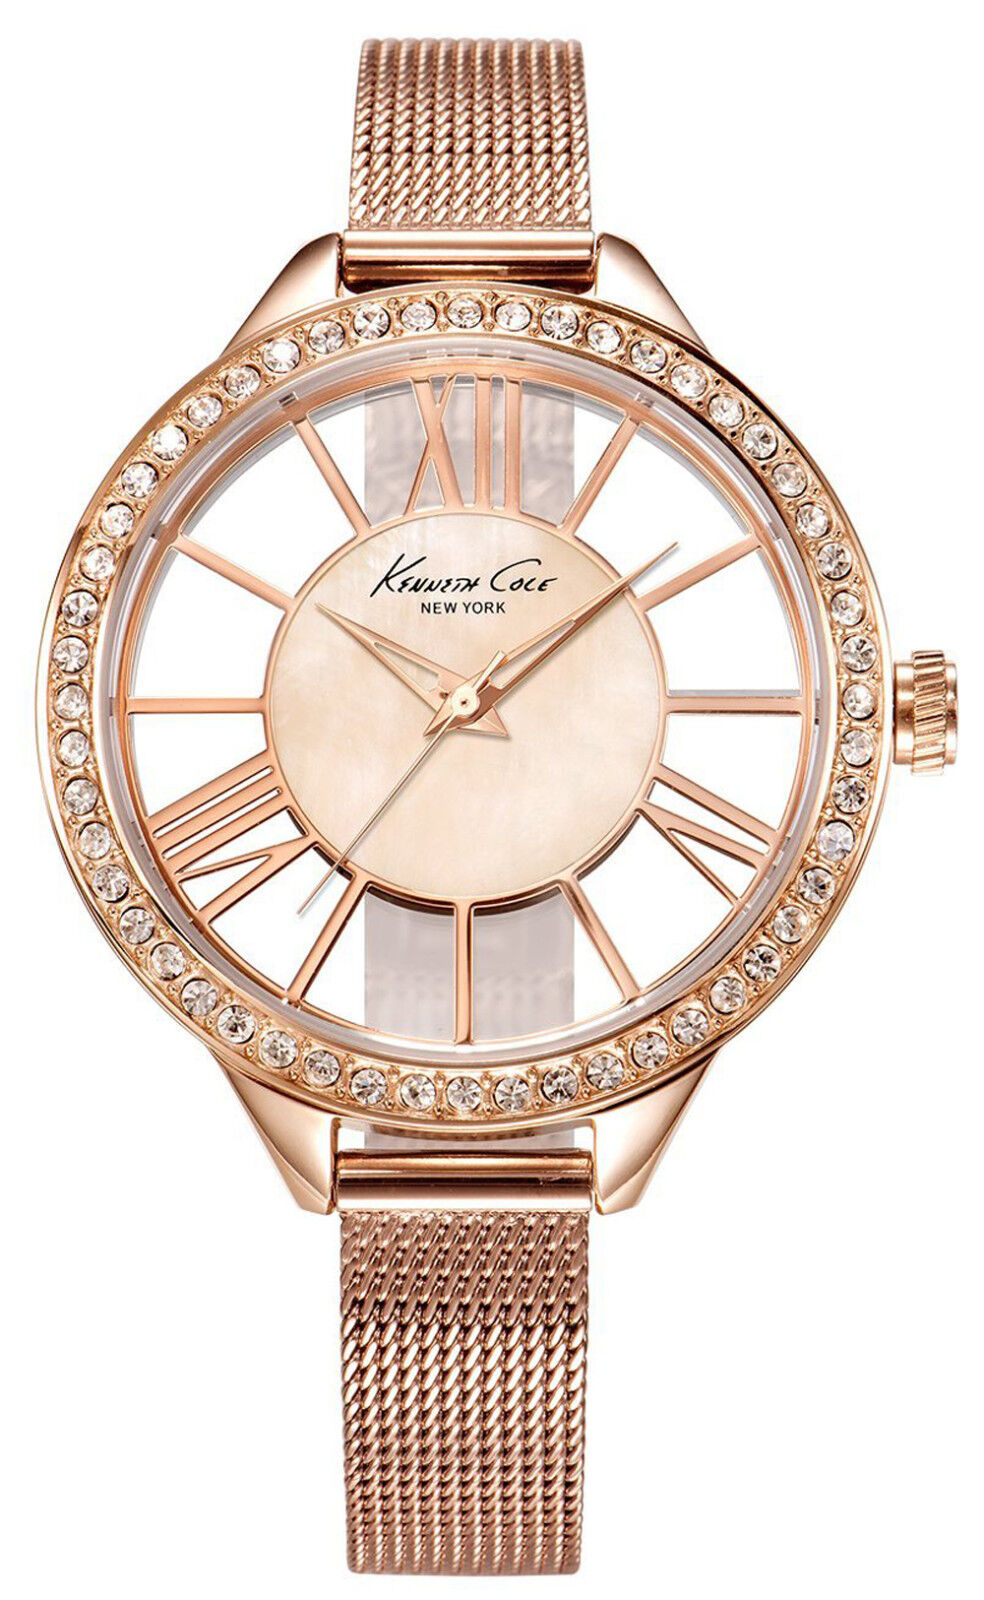 Kenneth Cole KC0009 New York Mother of Pearl Dial Rose Gold Tone Women\'s Watch